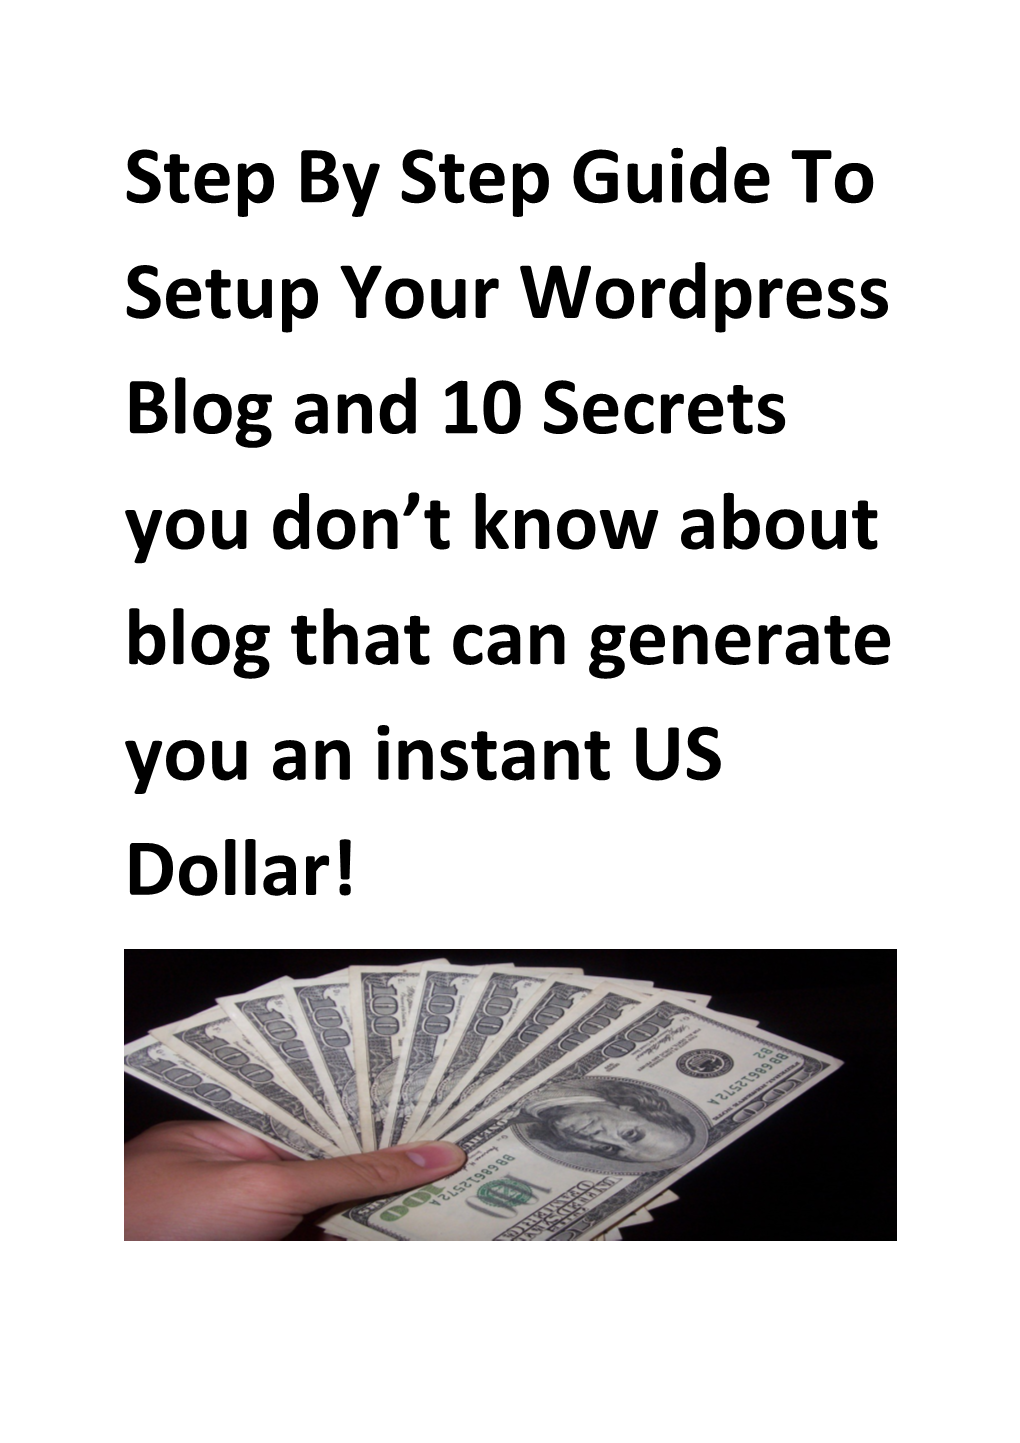 Step by Step Guide to Setup Your Wordpress Blog and 10 Secrets You Don T Know About Blog